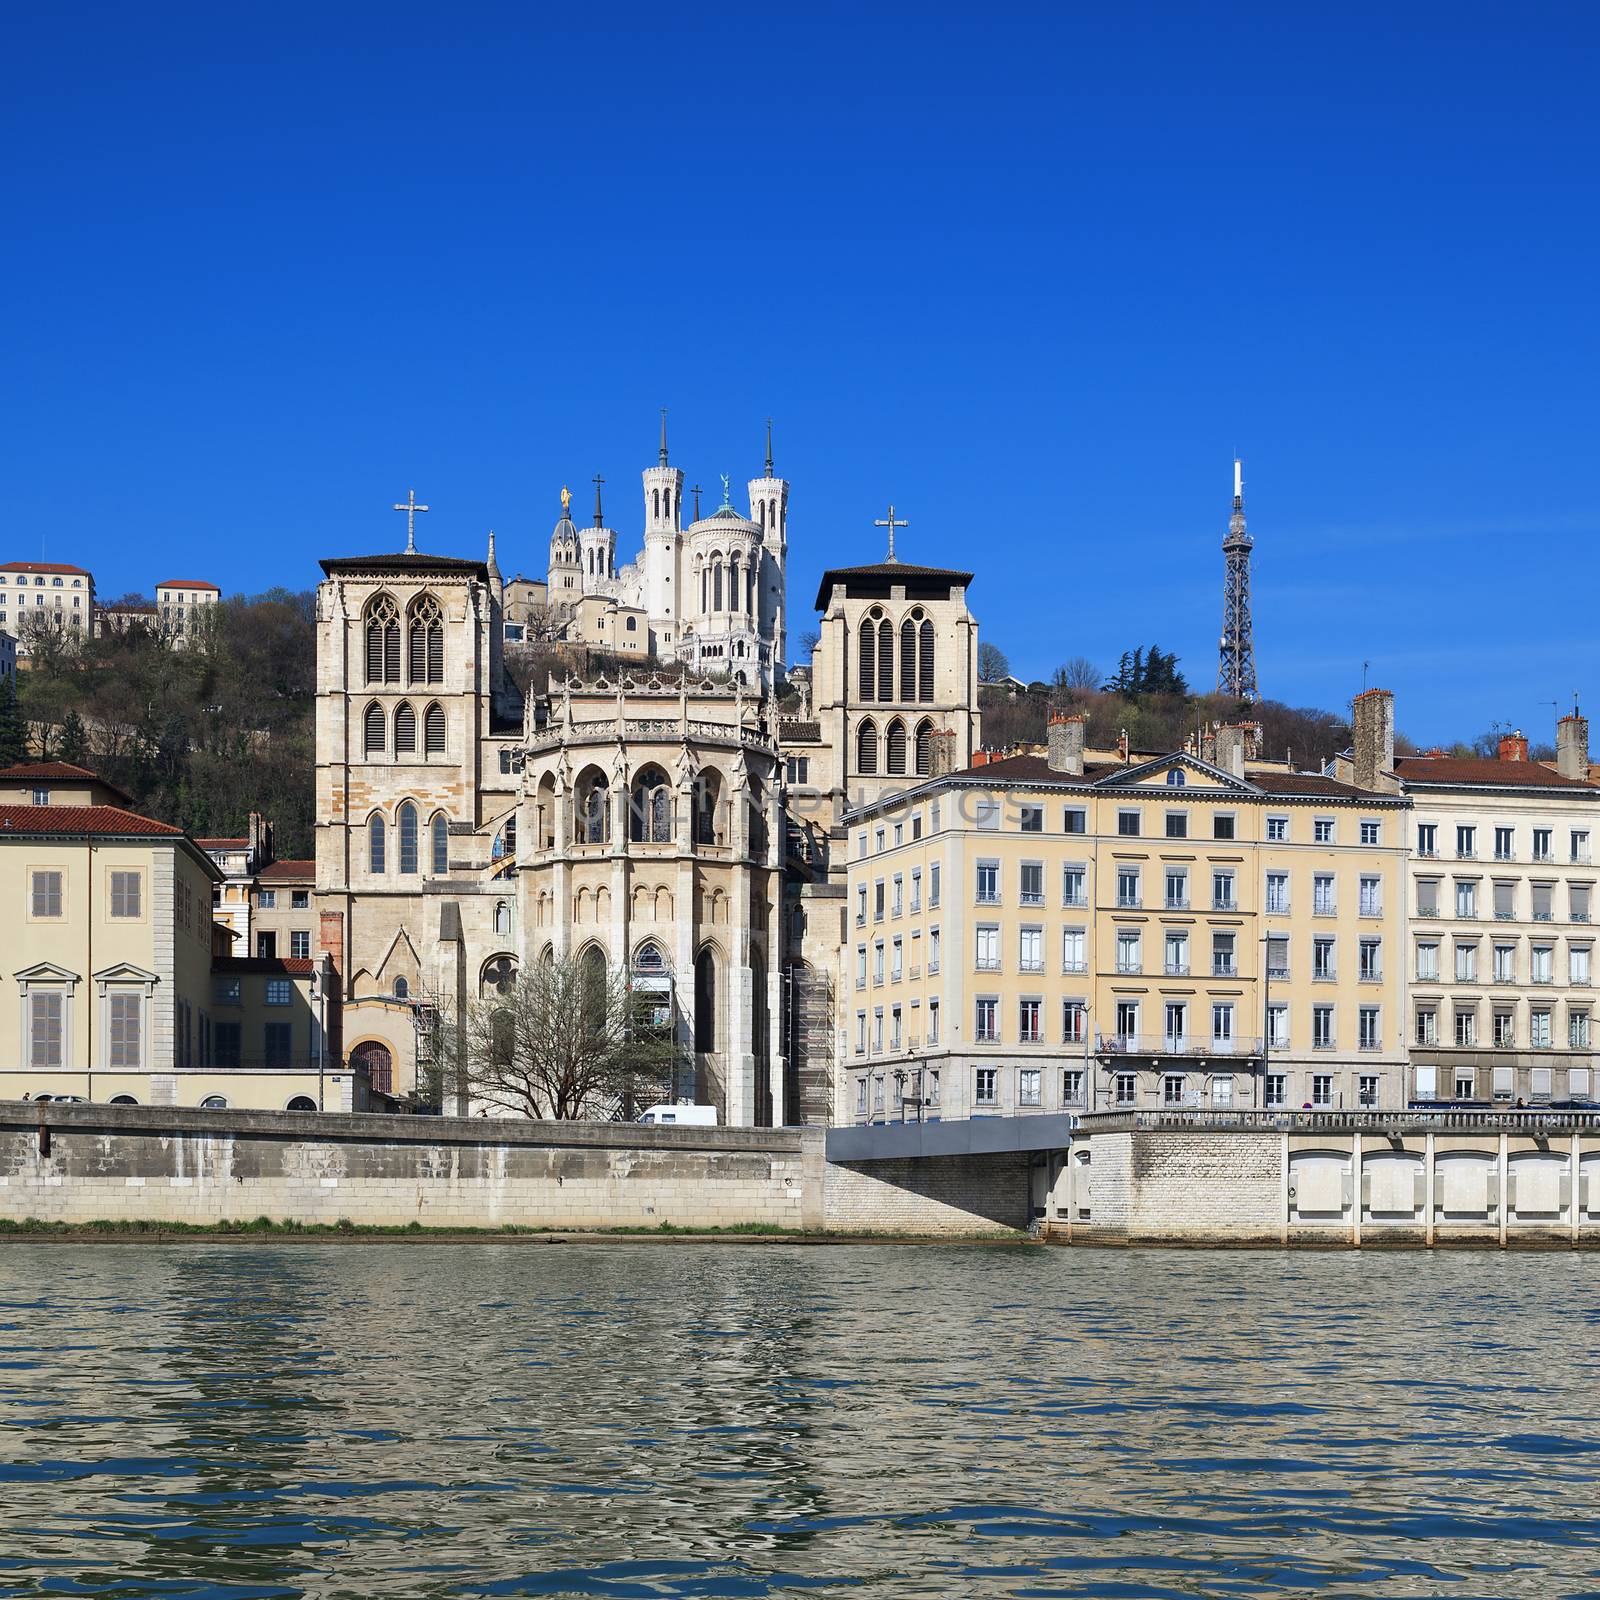 The apse of the Saint Jean cathedral, next to the Saone river, is dominated by the Fourviere basilica